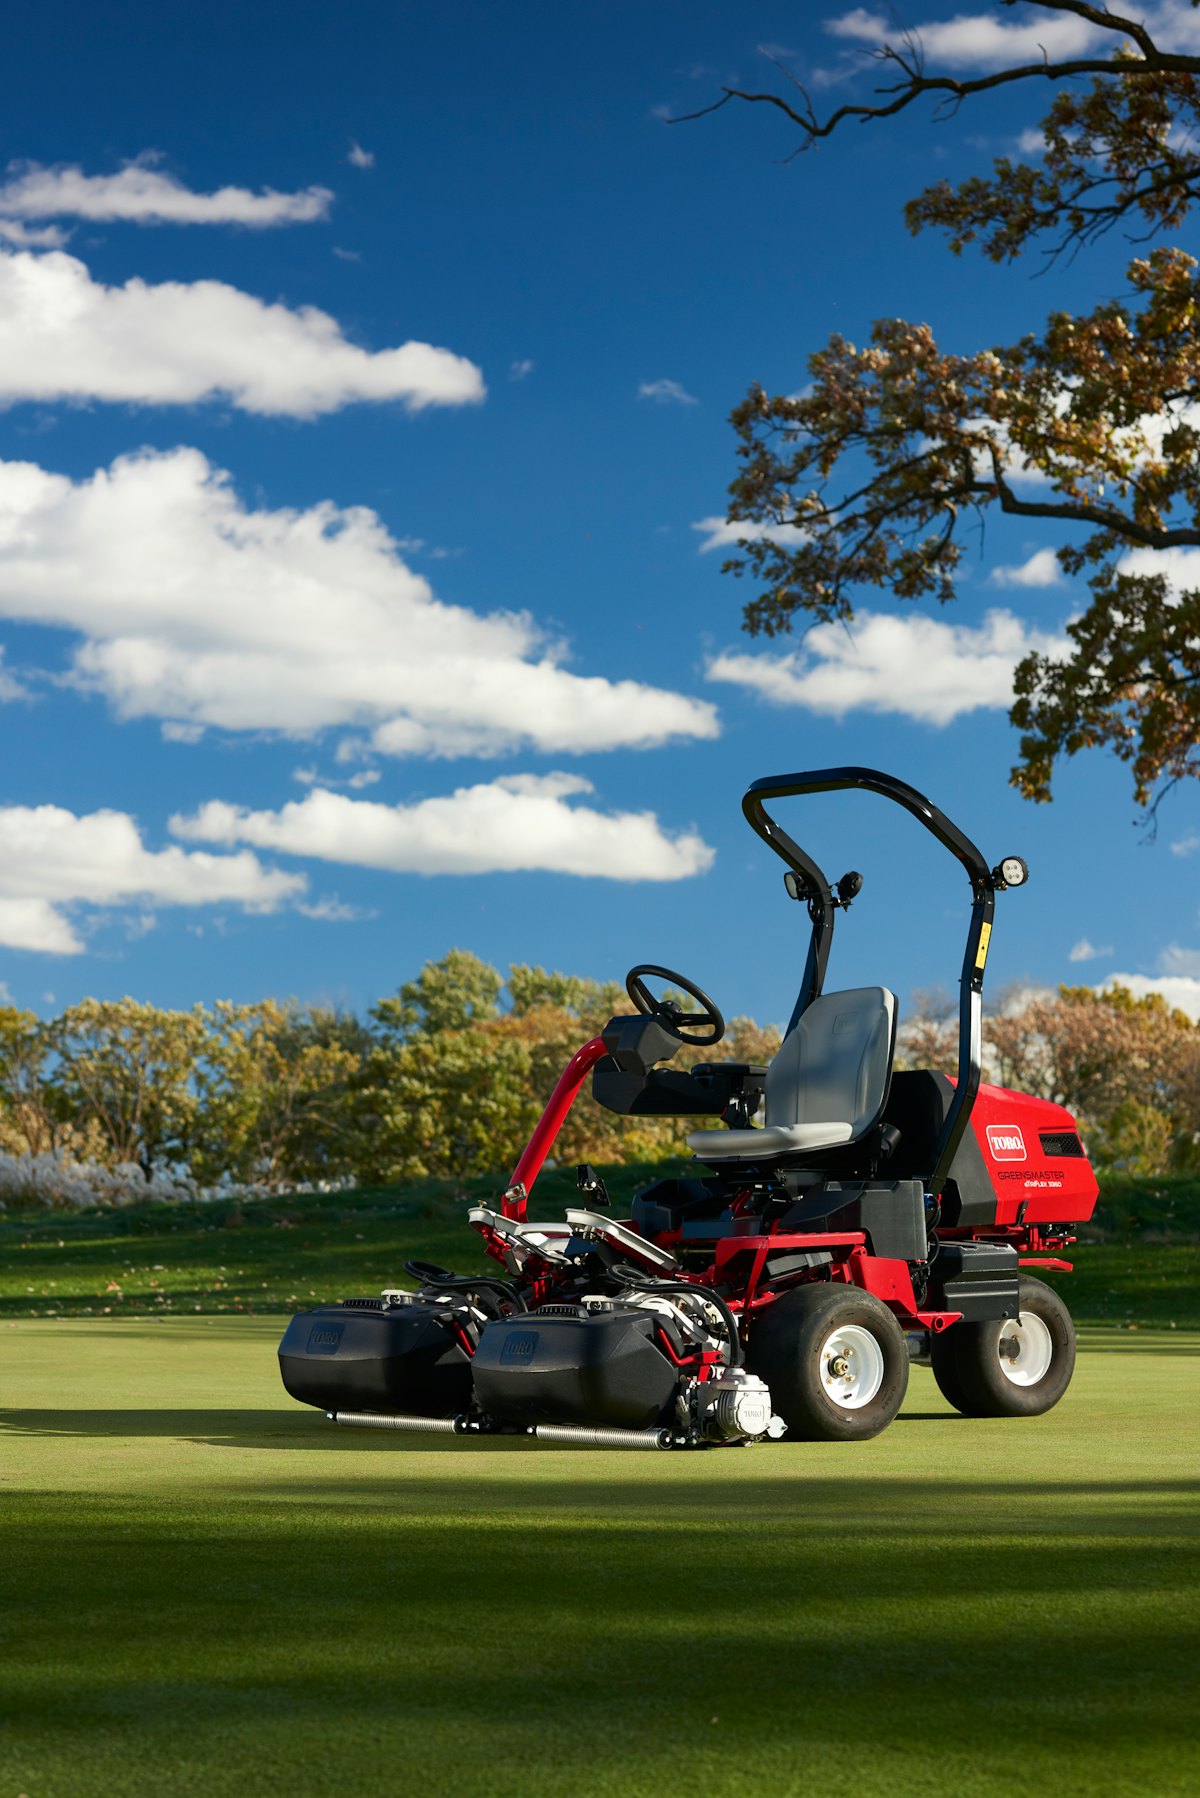 Get More From Your Greensmower With the Right Accessories - Toro Advantage